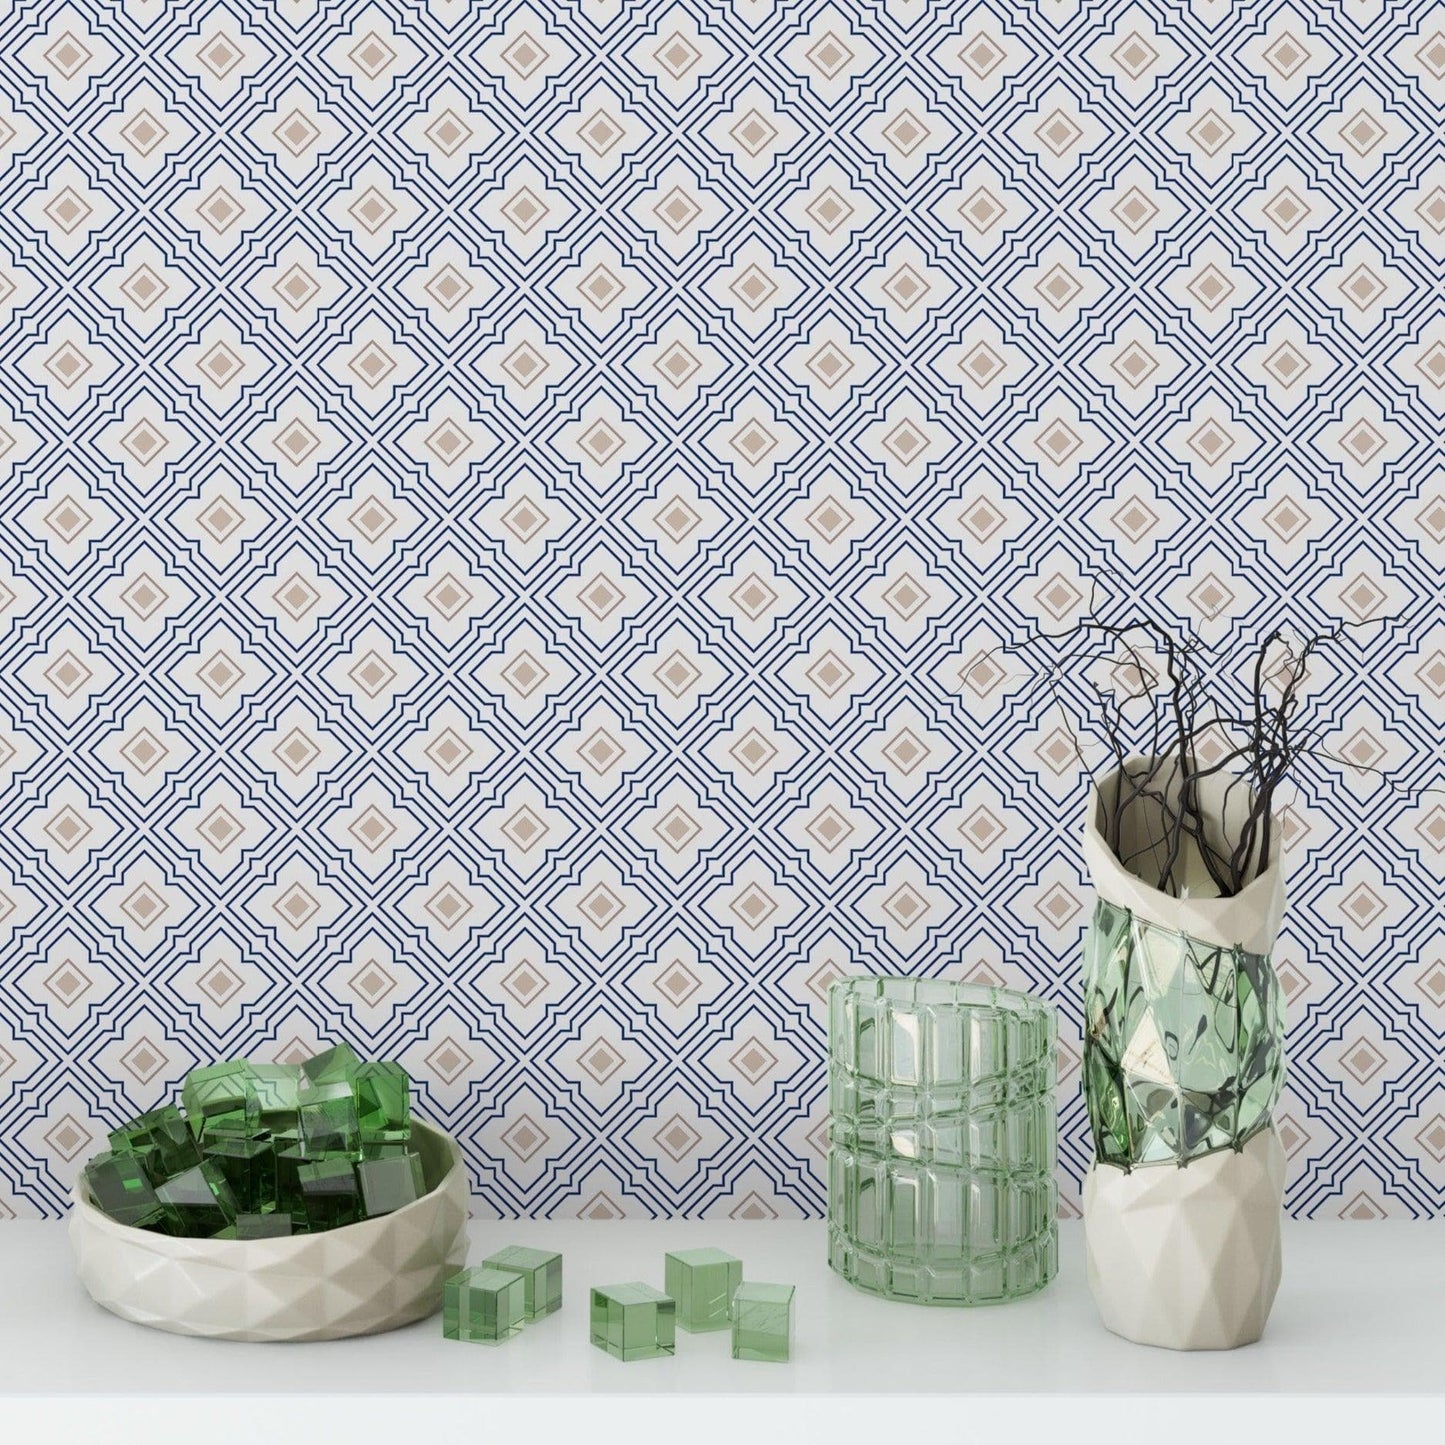 Luxury Gold Scallops Removable Wallpaper Blue and Gold Flower Tiles Removable Wallpaper 